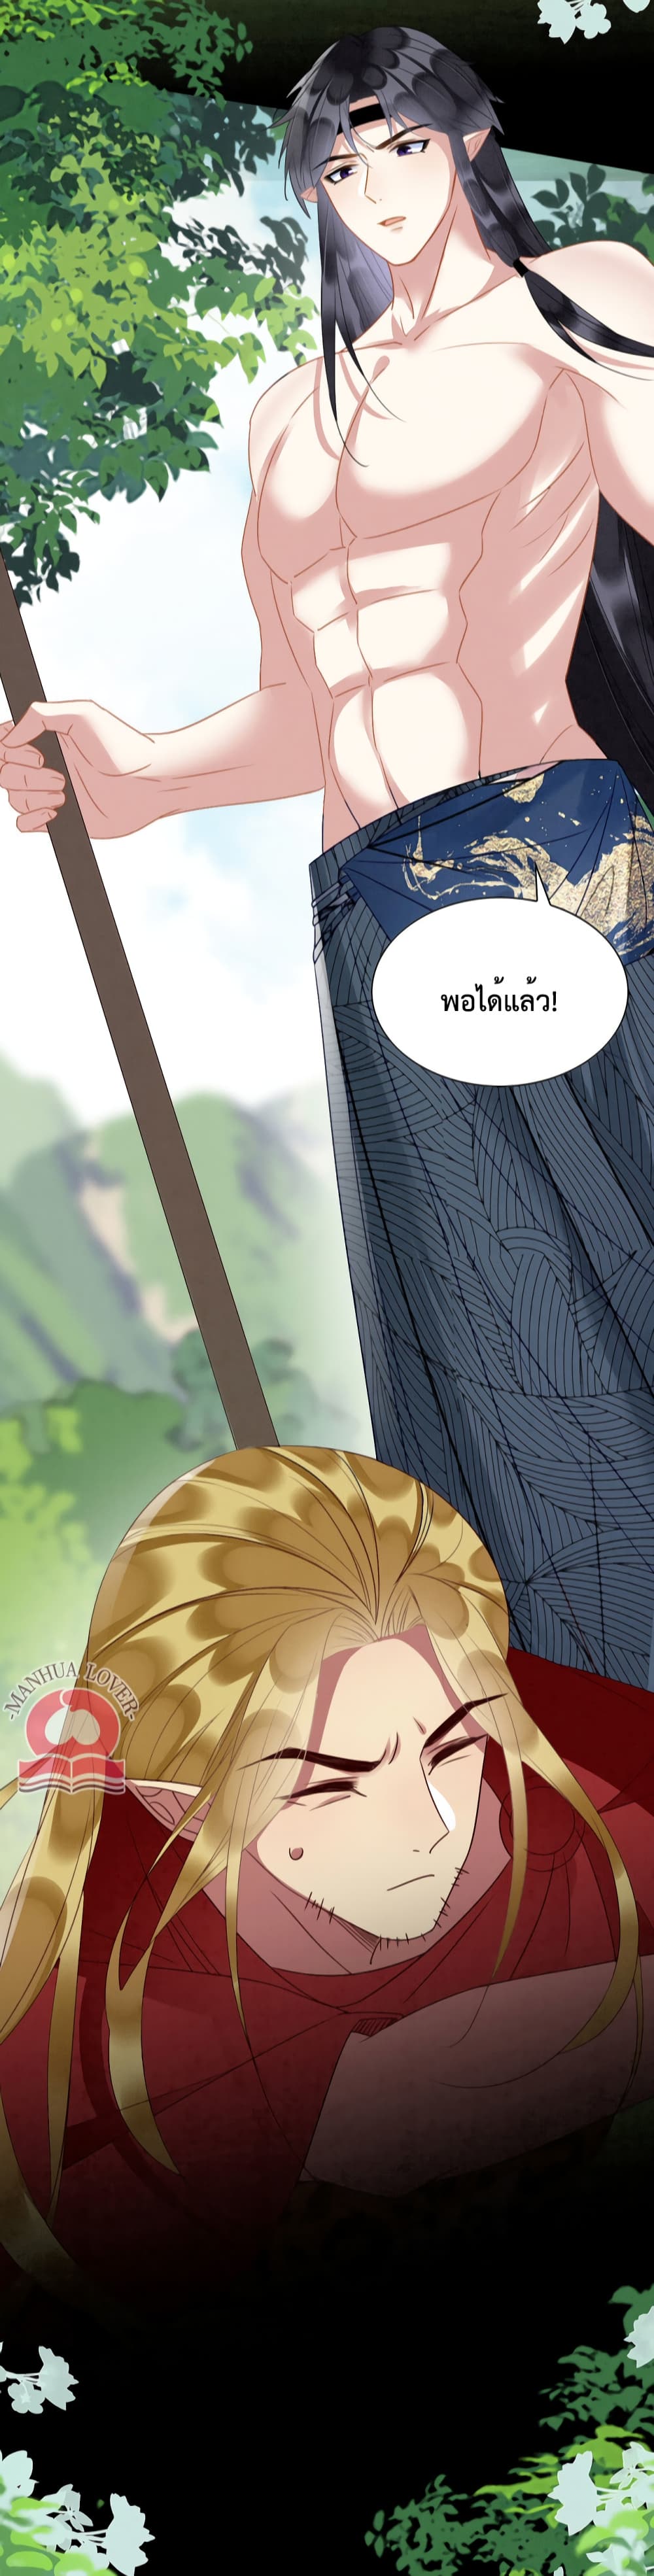 Help! The Snake Husband Loves Me So Much! ตอนที่ 26